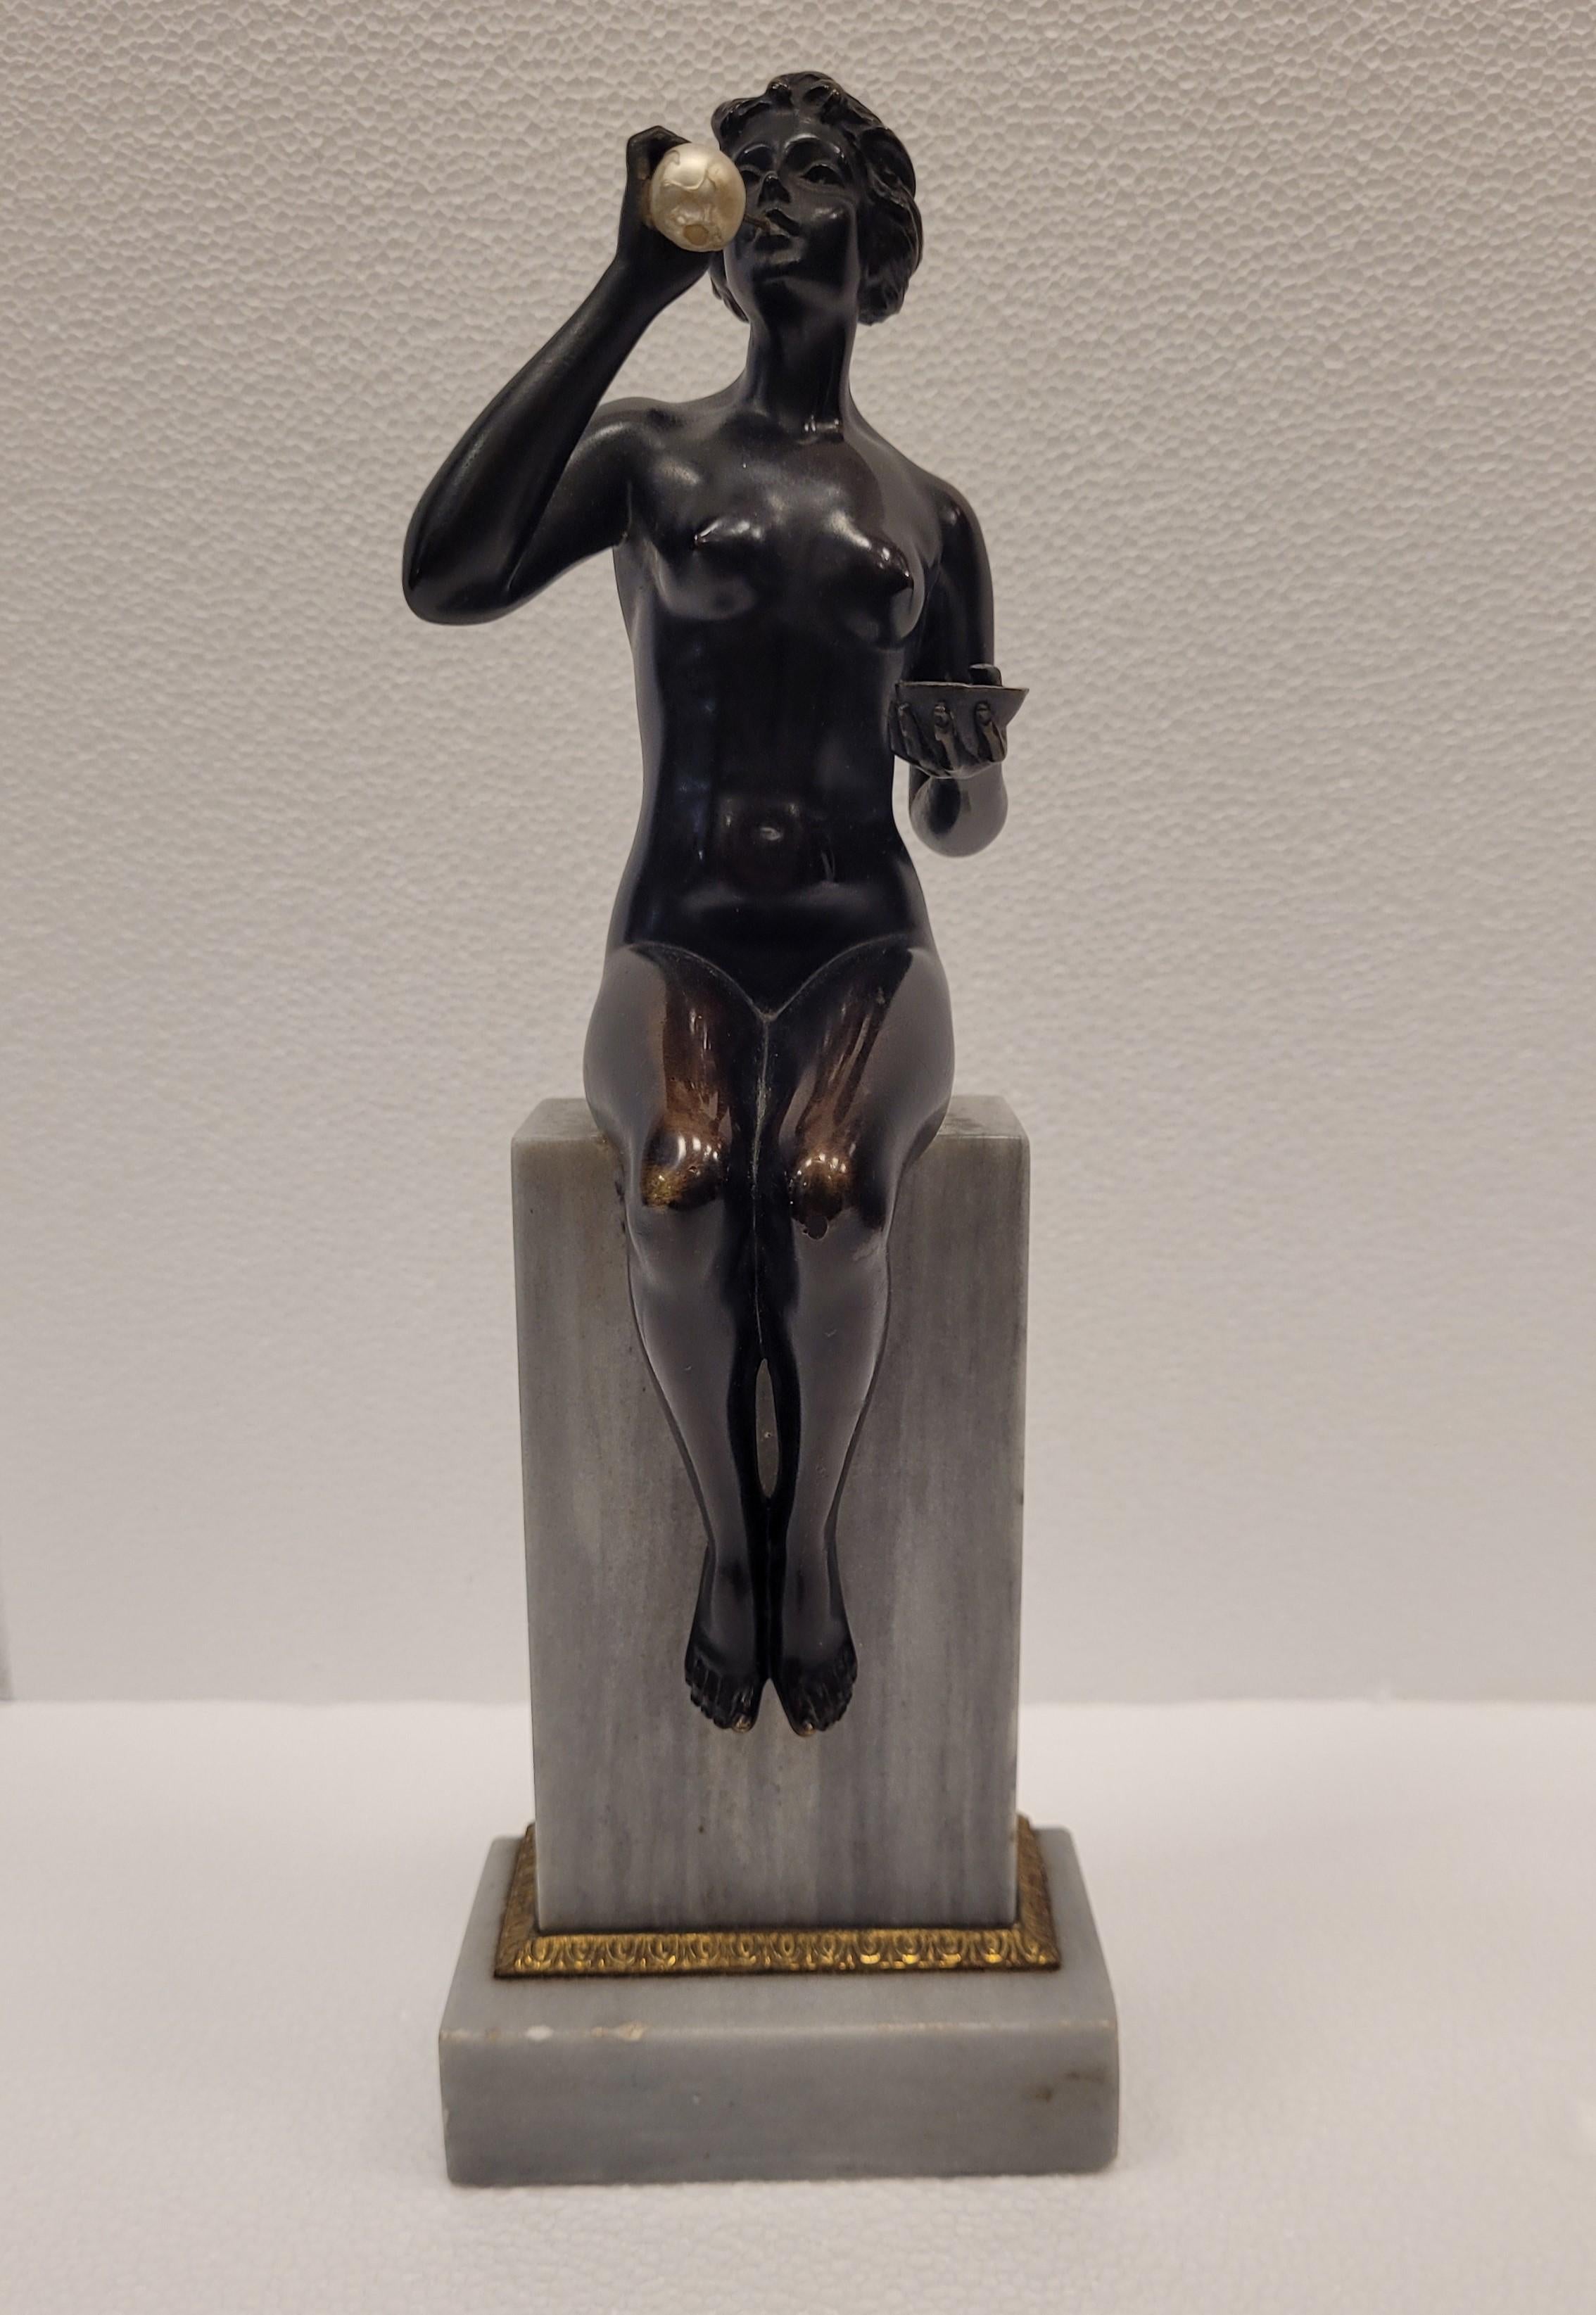 Very beautiful  and refined antique dark patinated solid bronze sculpture depicting a naked woman blowing bubbles
It is of German origin and dates from around 1920. Unsigned.

This beautiful woman is sitting on a marble pedestal. Sharp mold that is